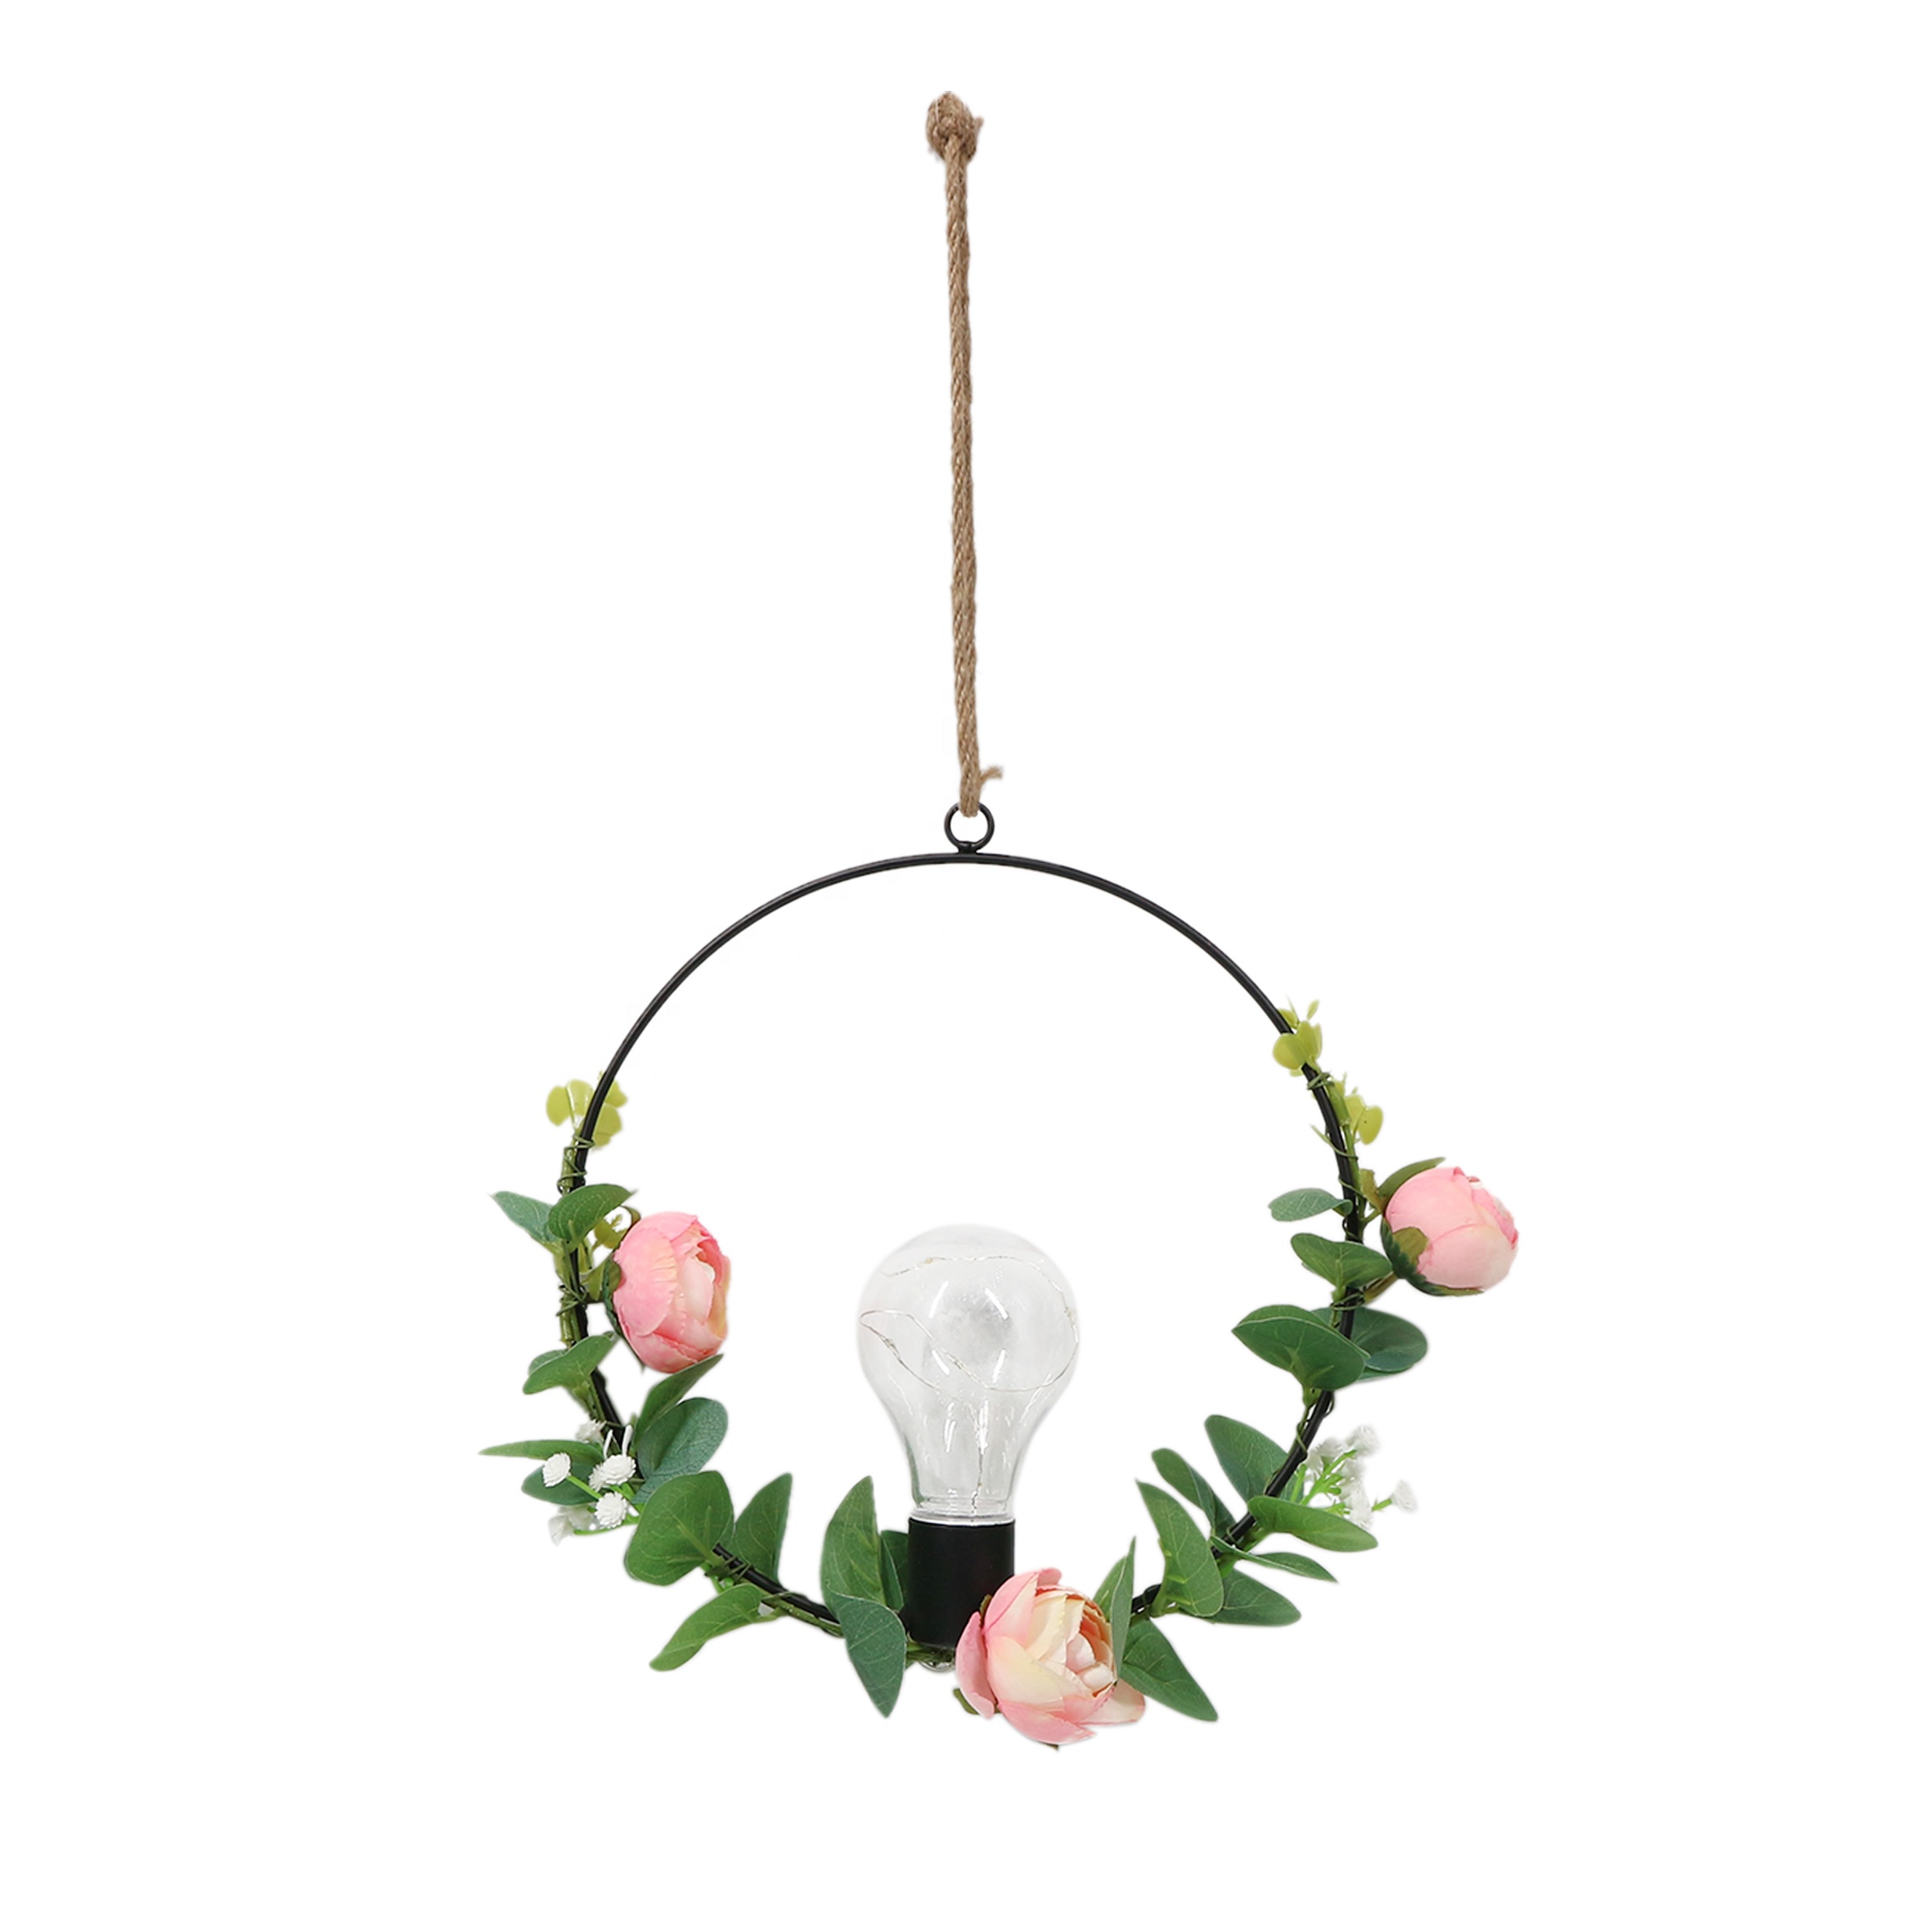 New Home Decorative Round Light up artificial flowers